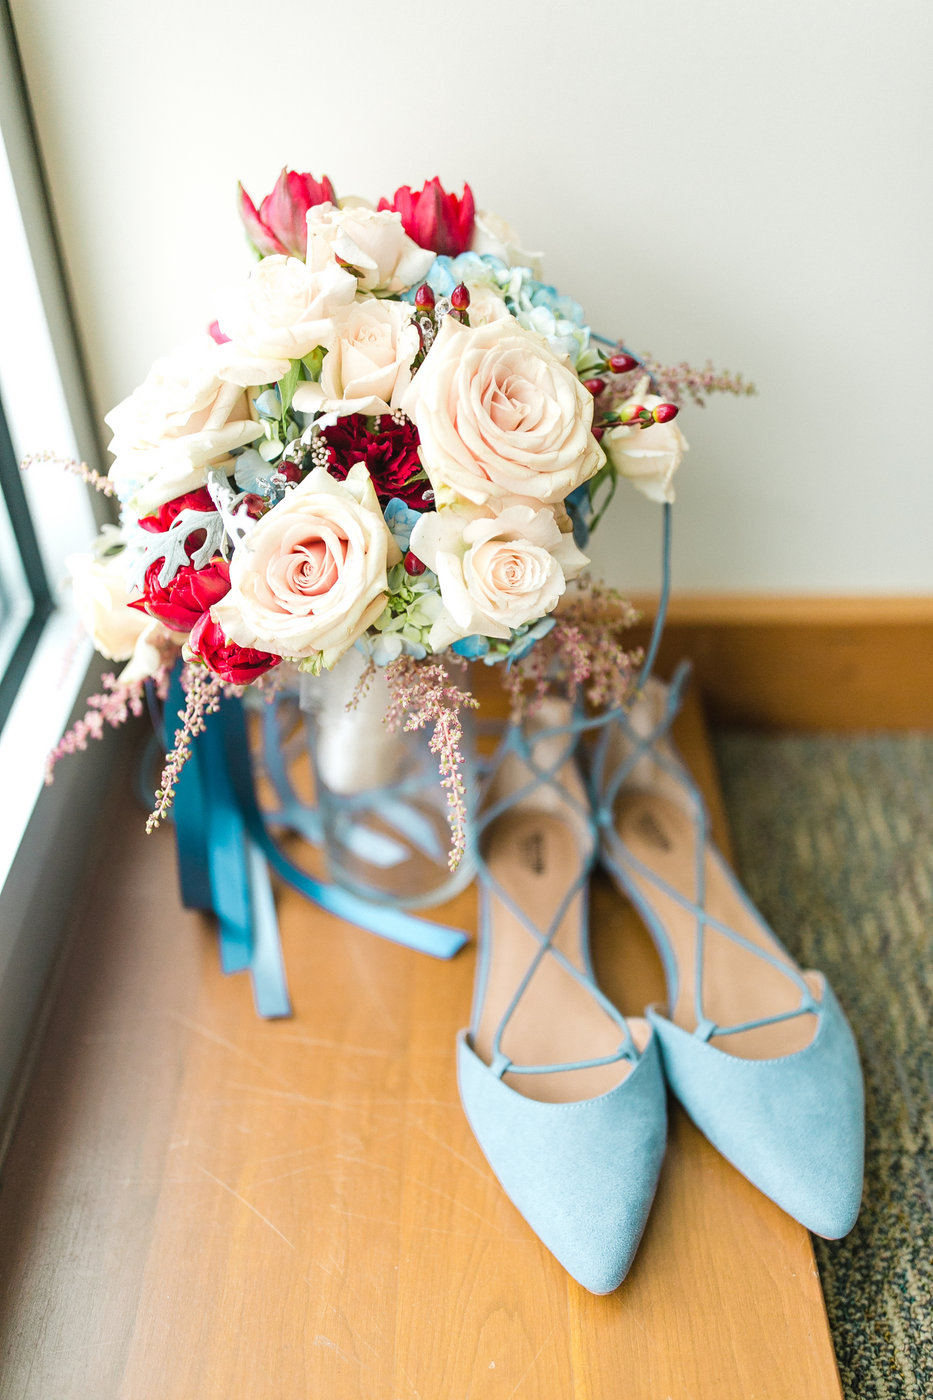 Blue wedding shoes sit aside a bright wedding bouquet for a classic daytime wedding